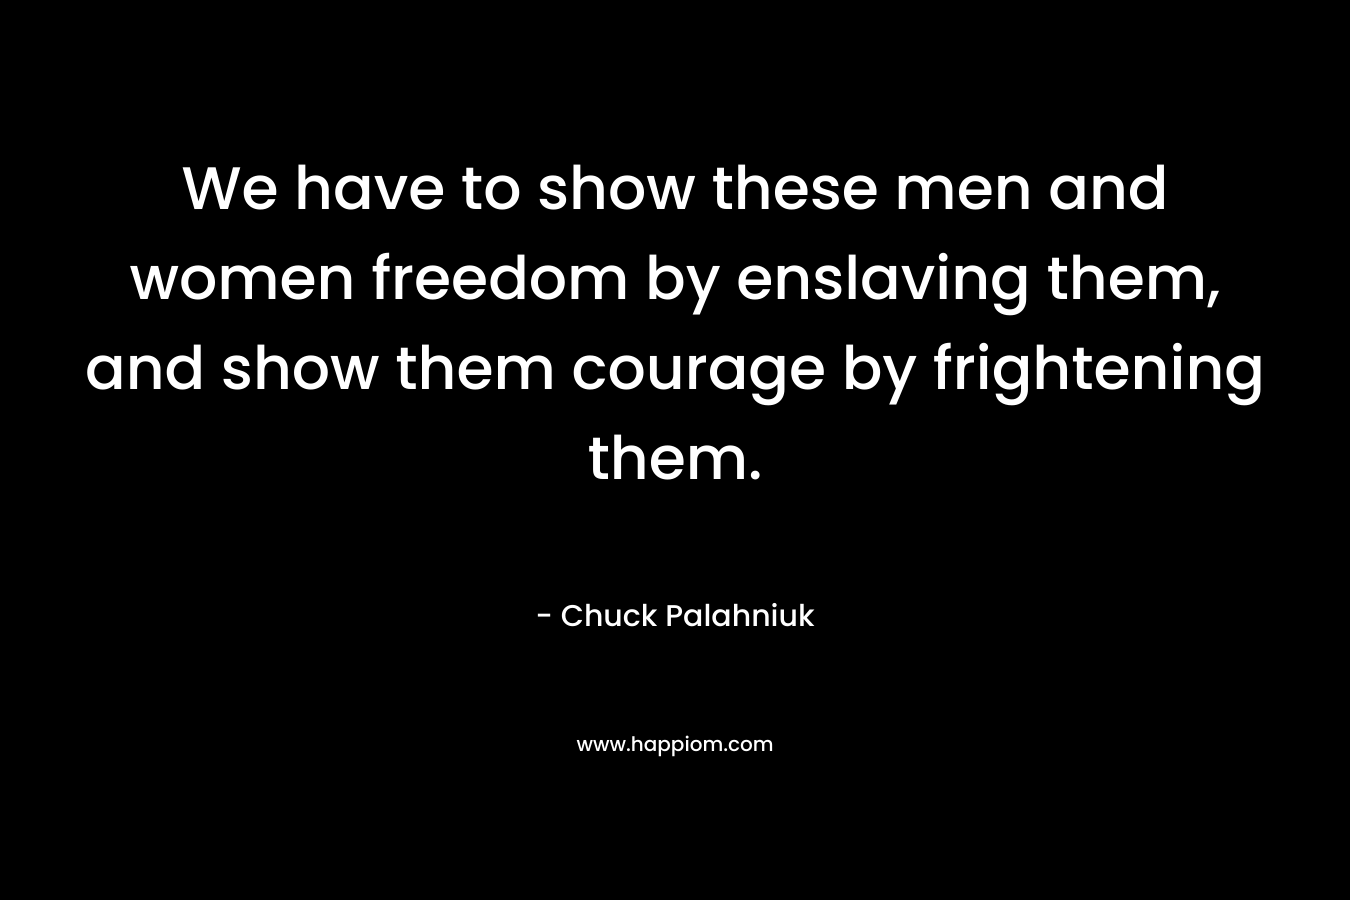 We have to show these men and women freedom by enslaving them, and show them courage by frightening them.